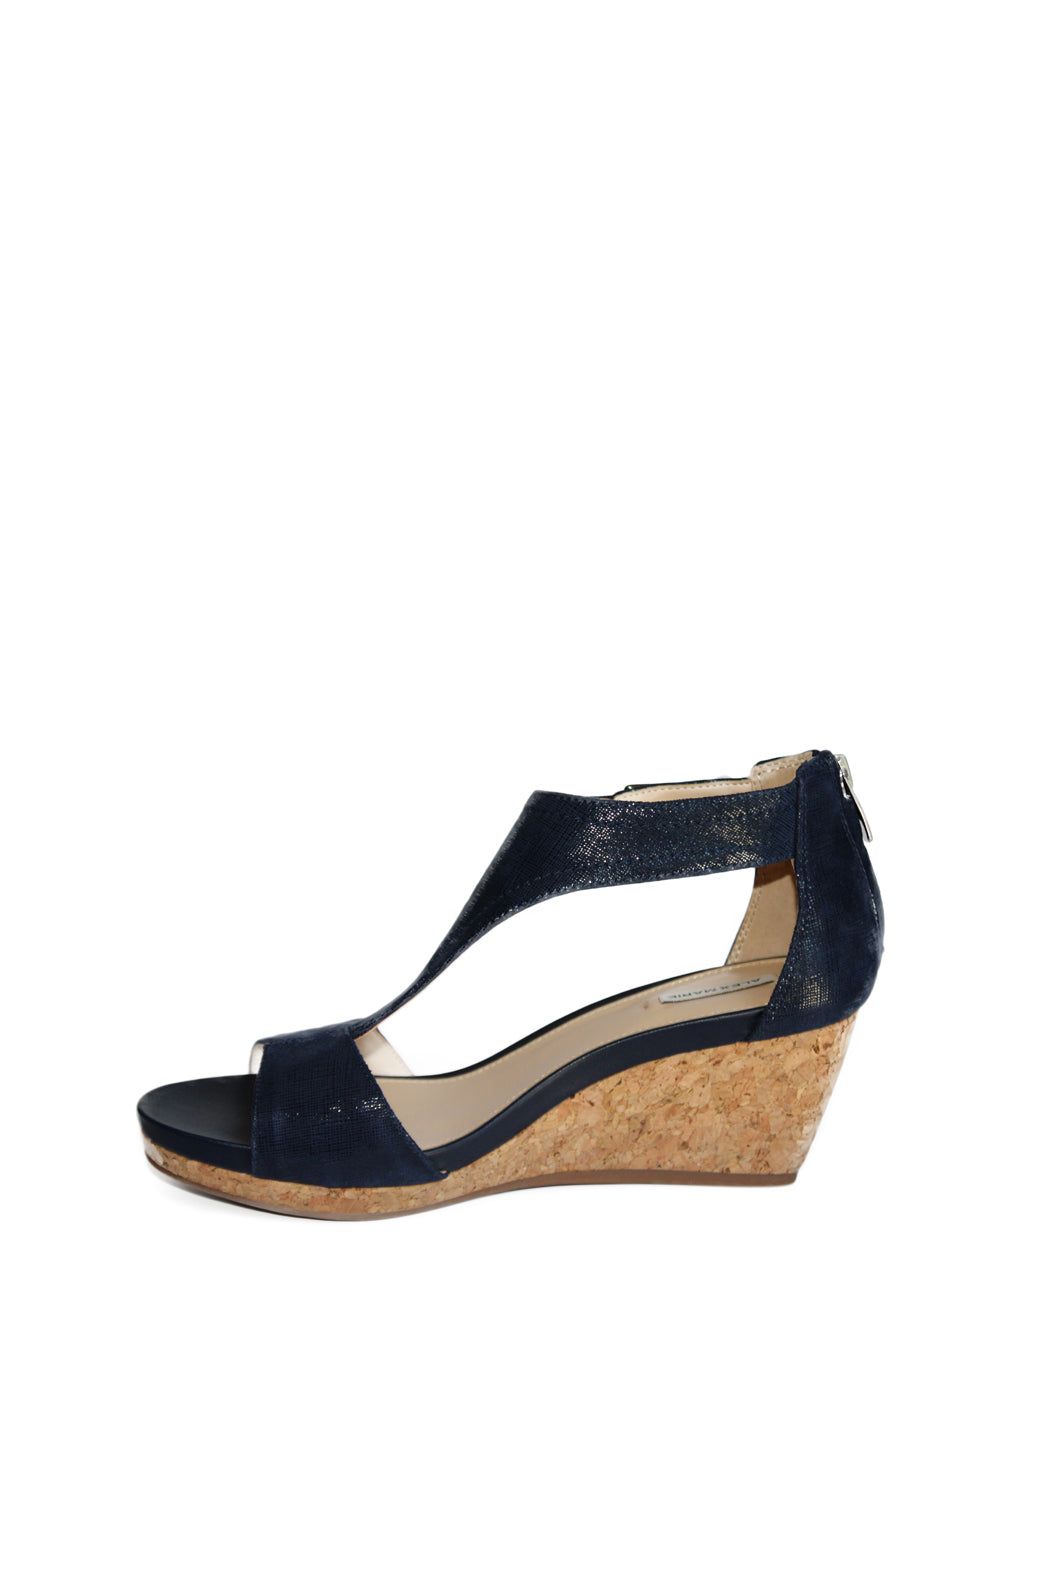 Alex Marie Navy wedge sandals , leather  